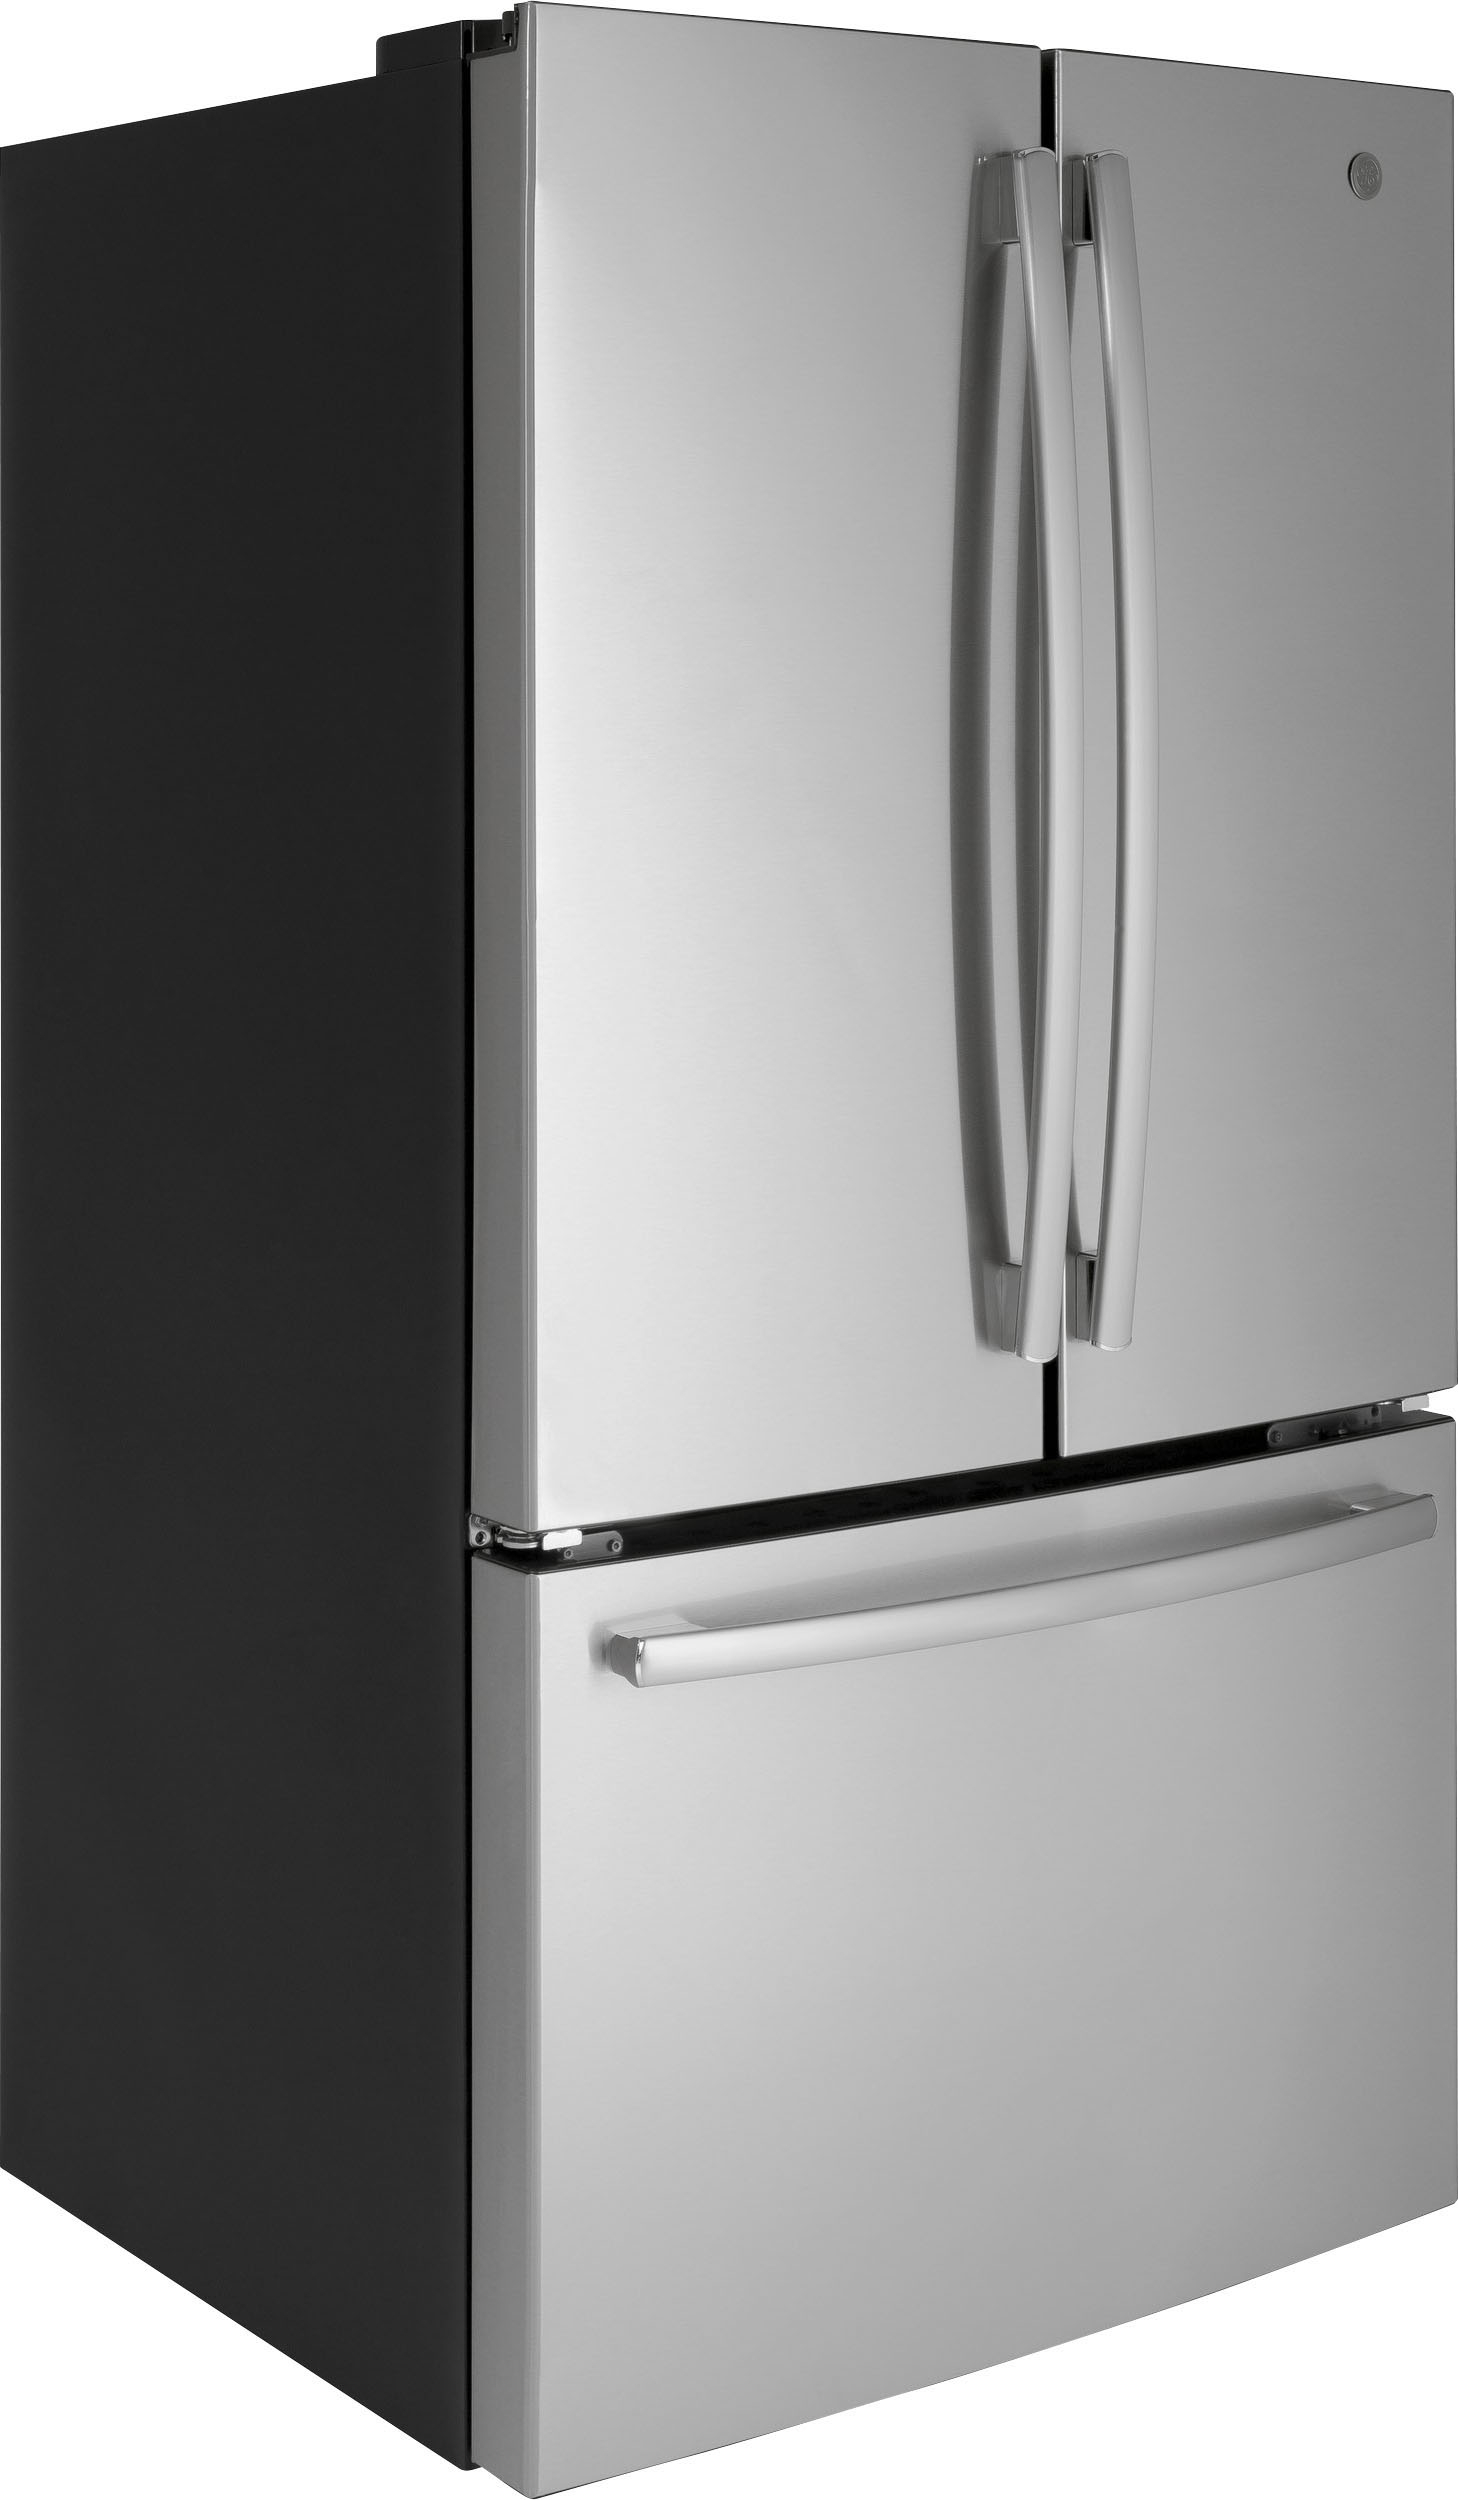 Angle View: GE Profile - 27.7 Cu. Ft. French Door Refrigerator with Hands-Free AutoFill - Slate